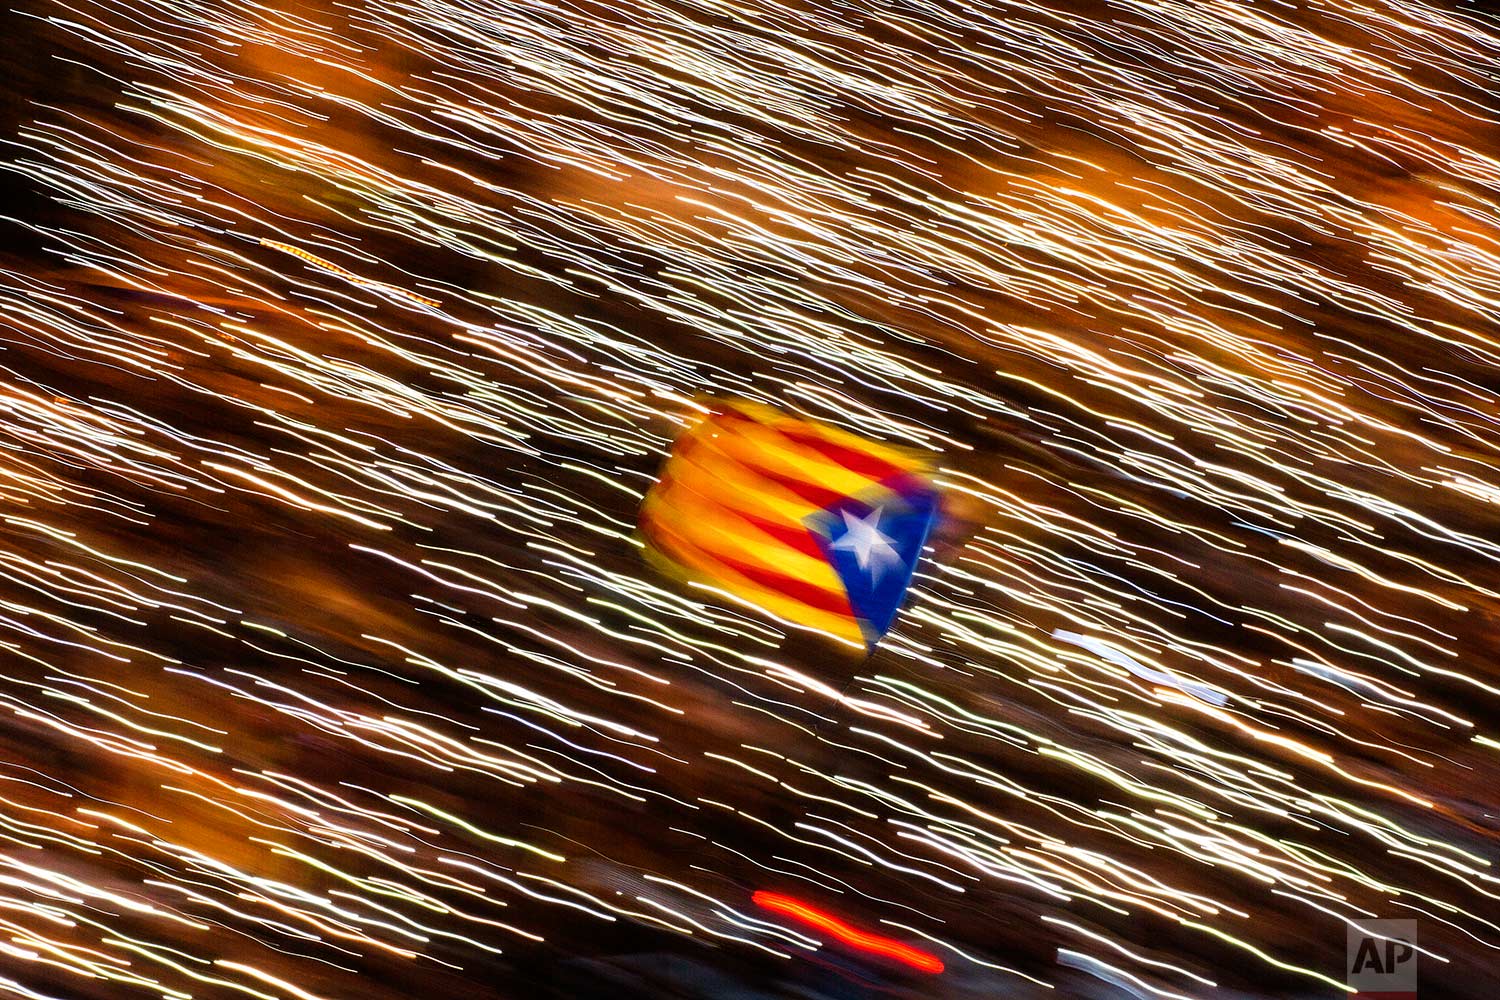  In this Saturday, Nov 11, 2017 photo, an independence flag is waved as demonstrators take part at a protest calling for the release of Catalan jailed politicians, in Barcelona, Spain. Eight members of the now-defunct Catalan government remain jailed